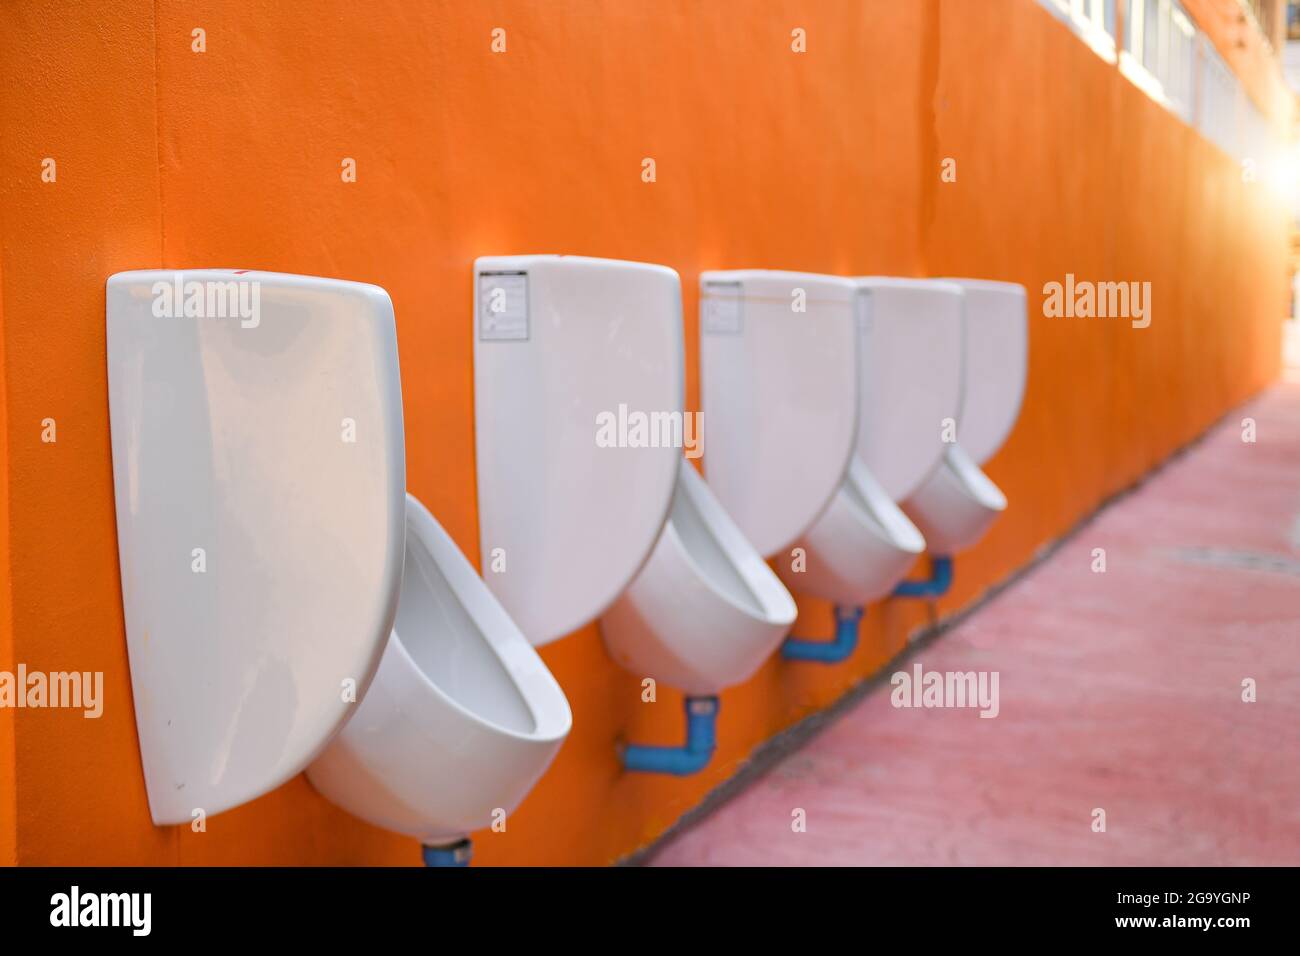 Row of Public urinals hanging on an orange wall Stock Photo